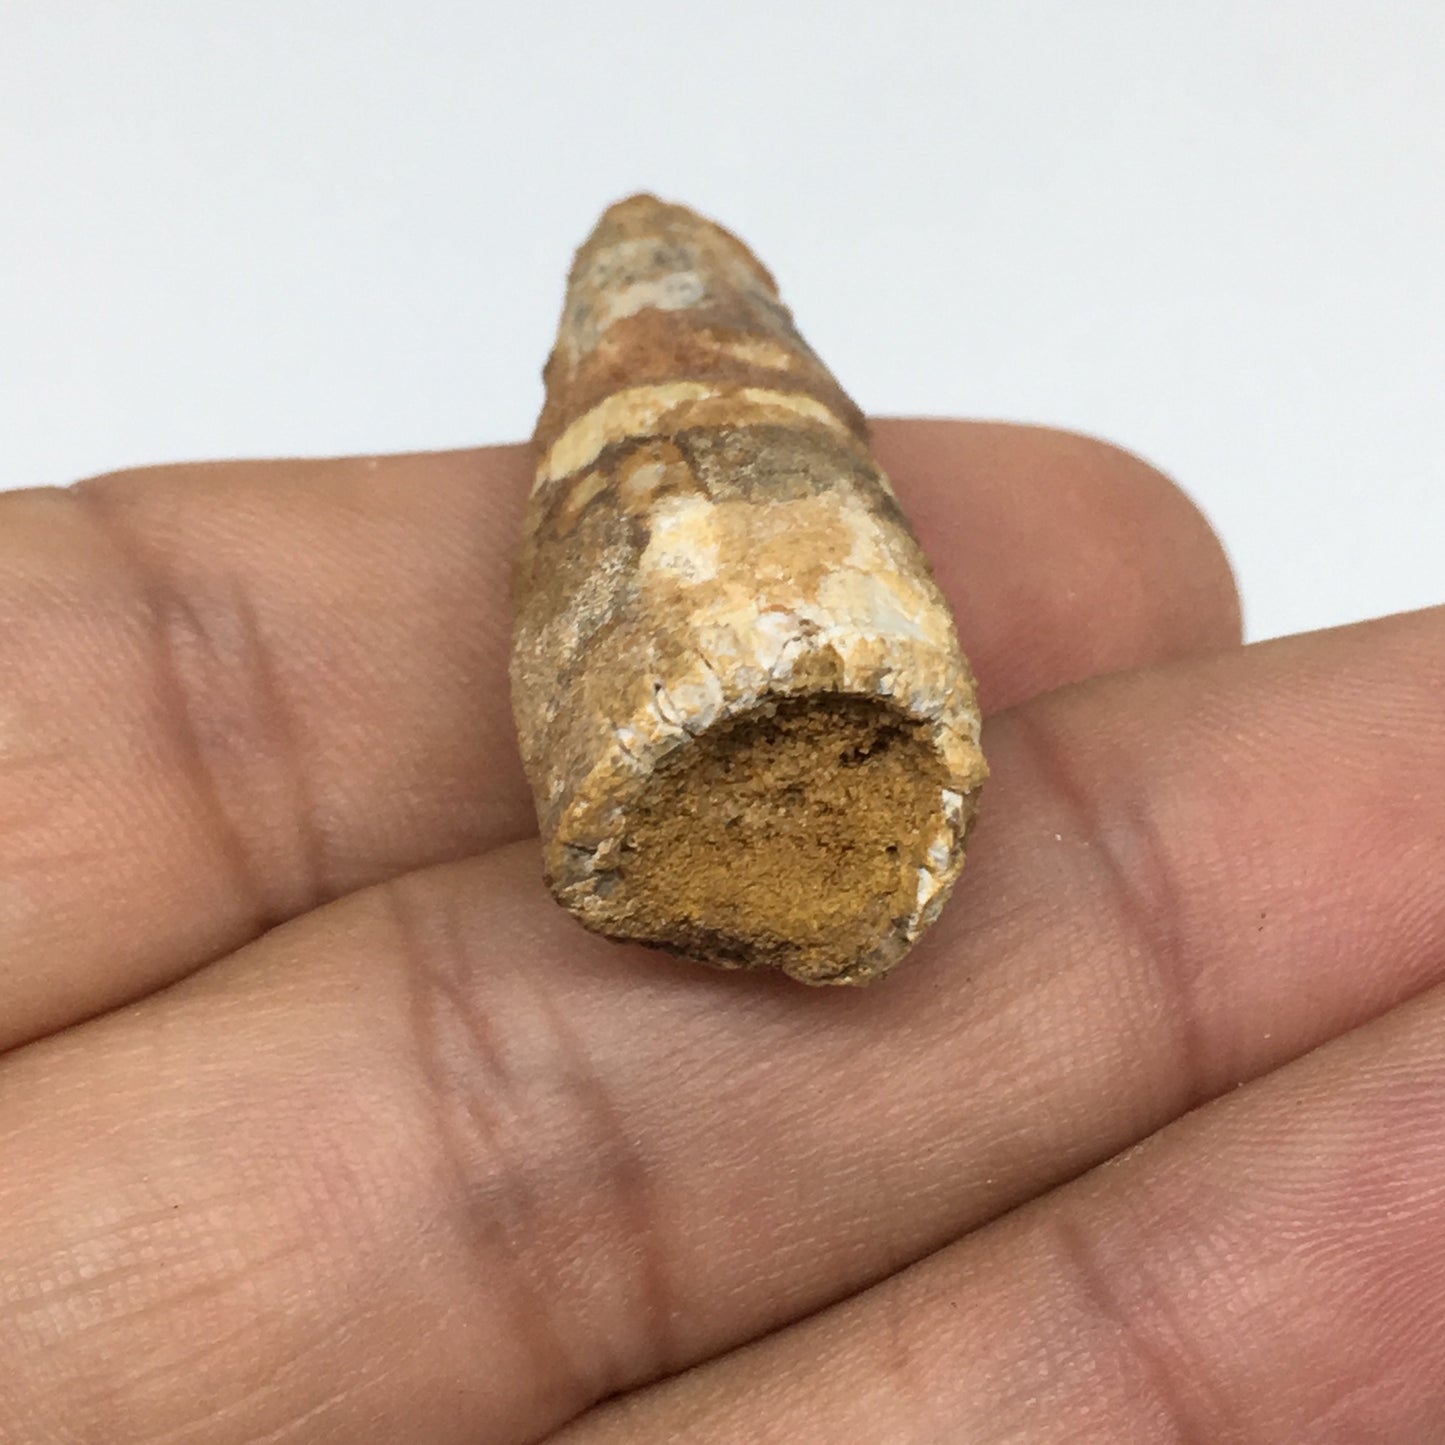 6.4g,1.5"X 0.6"x 0.5" Rare Natural Small Fossils Spinosaurus Tooth @Morocco,F195